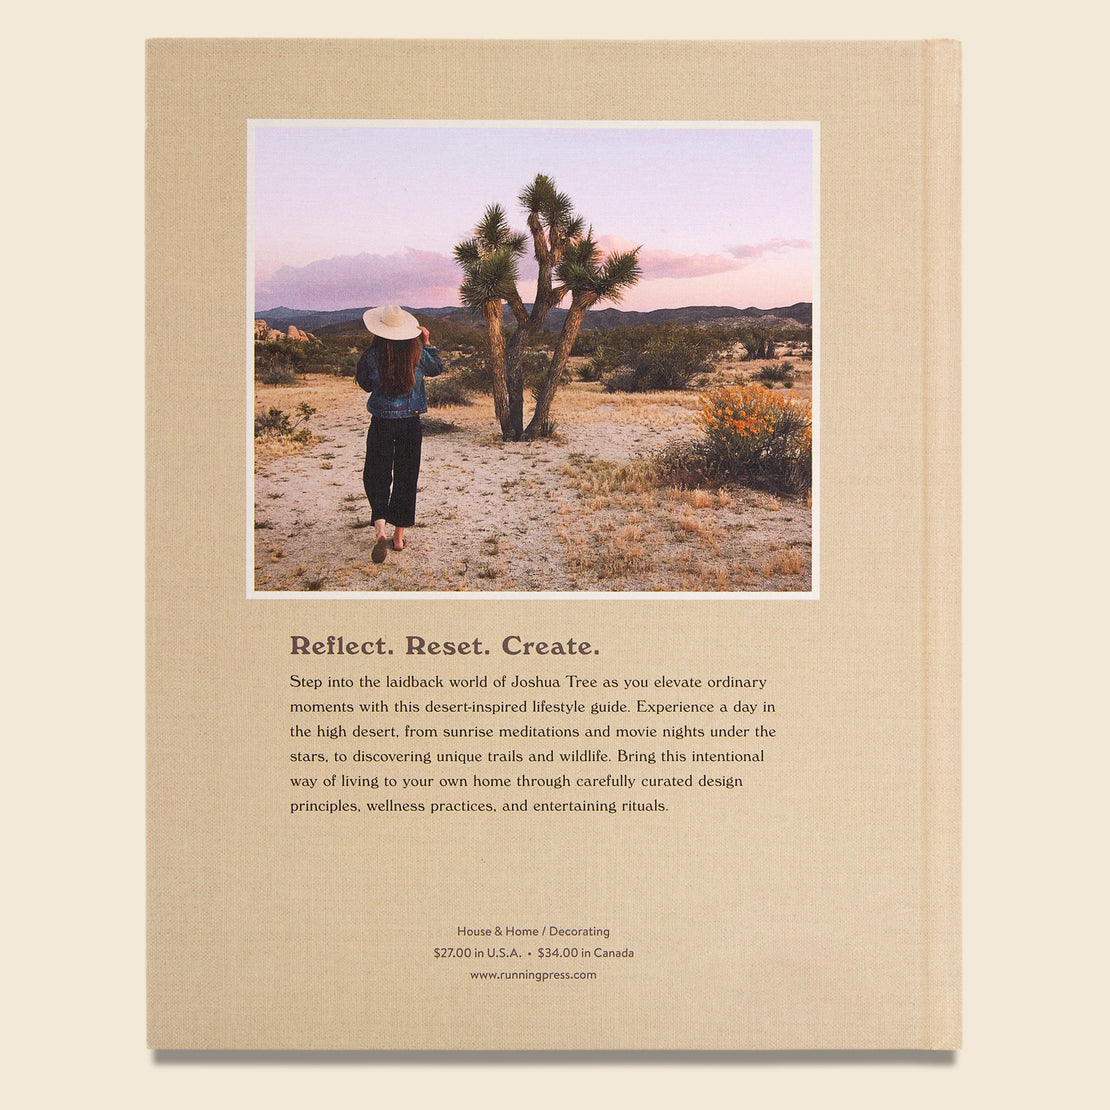 At Home in Joshua Tree: A Field Guide to Desert Living - Bookstore - STAG Provisions - Home - Library - Book